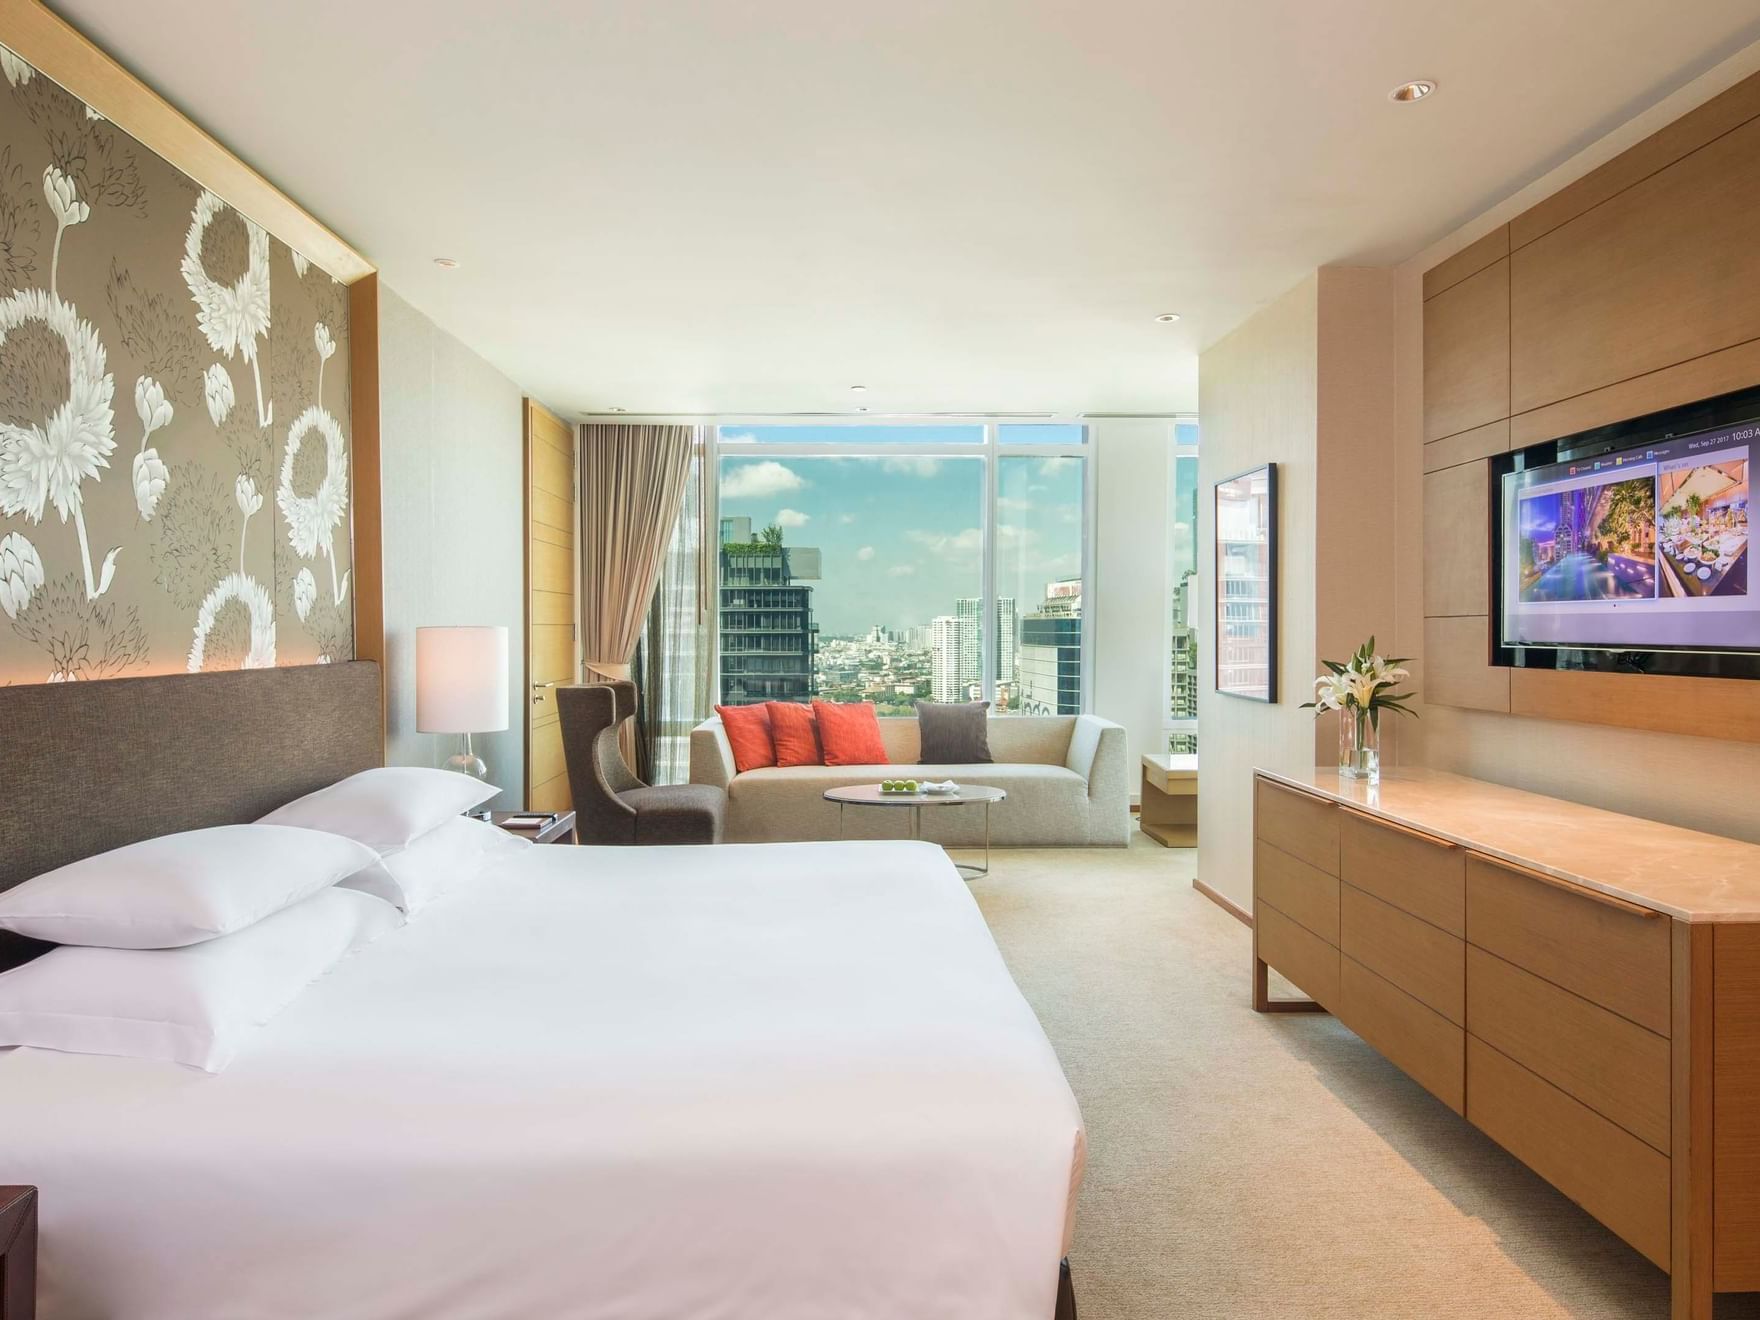 Premium Deluxe Room with modern designs at Eastin Hotels